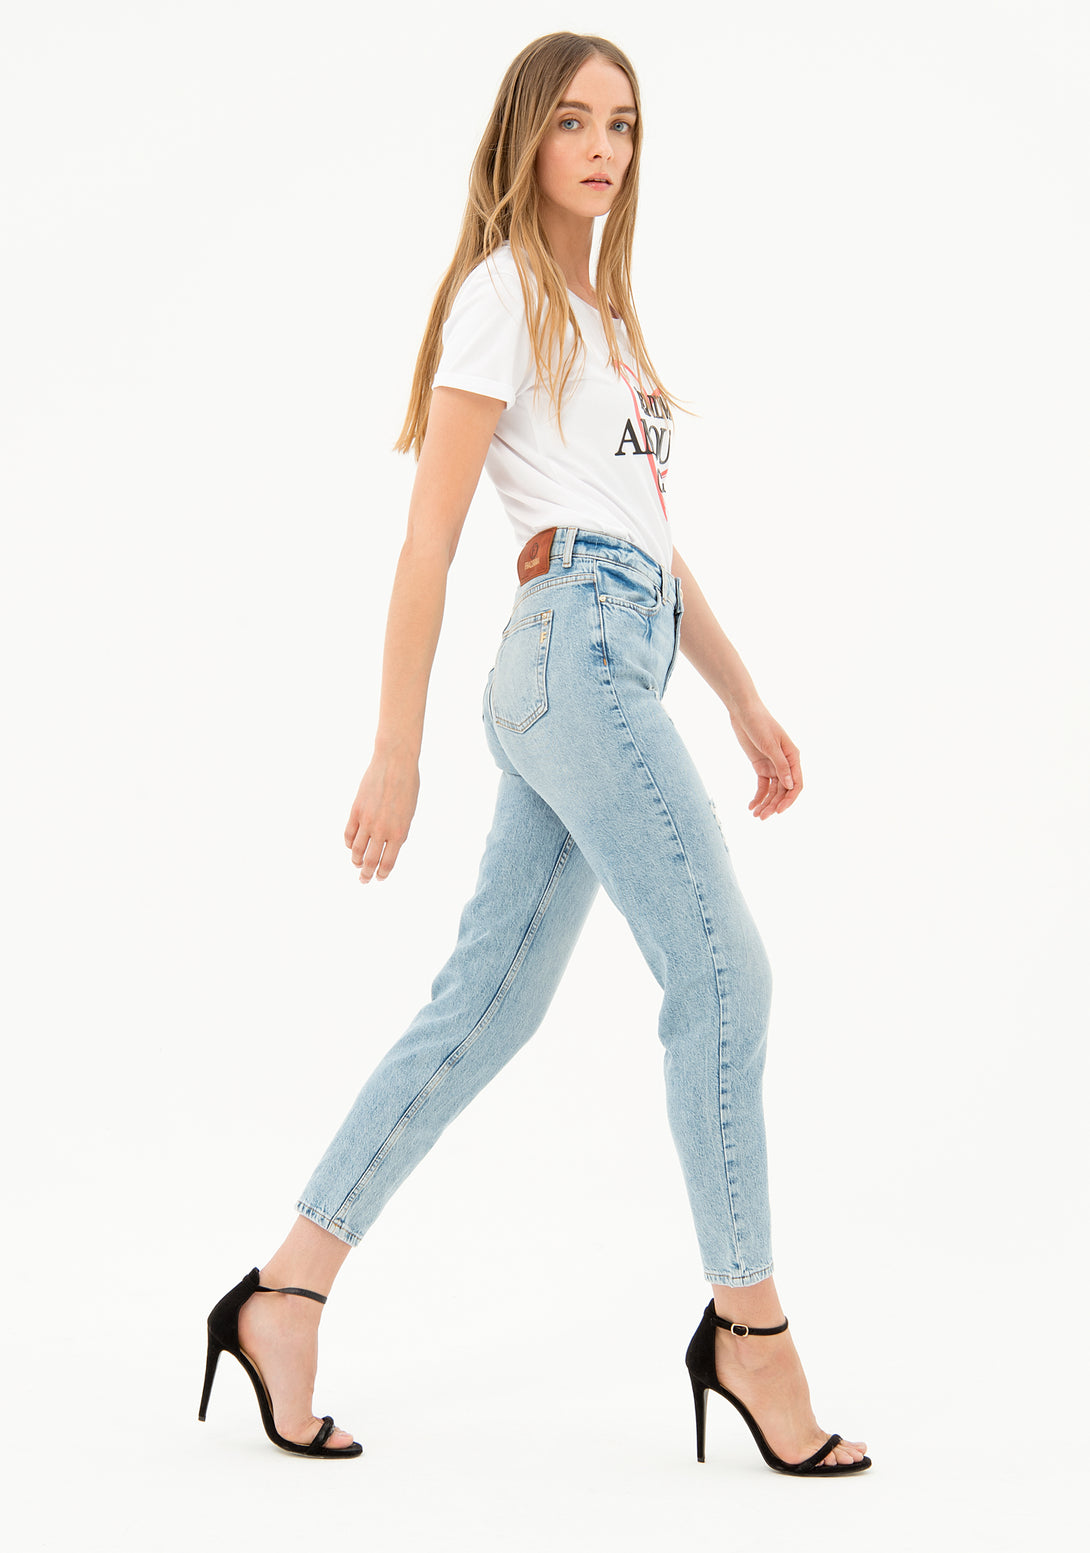 Jeans boyfriend fit made in denim with light wash and rips